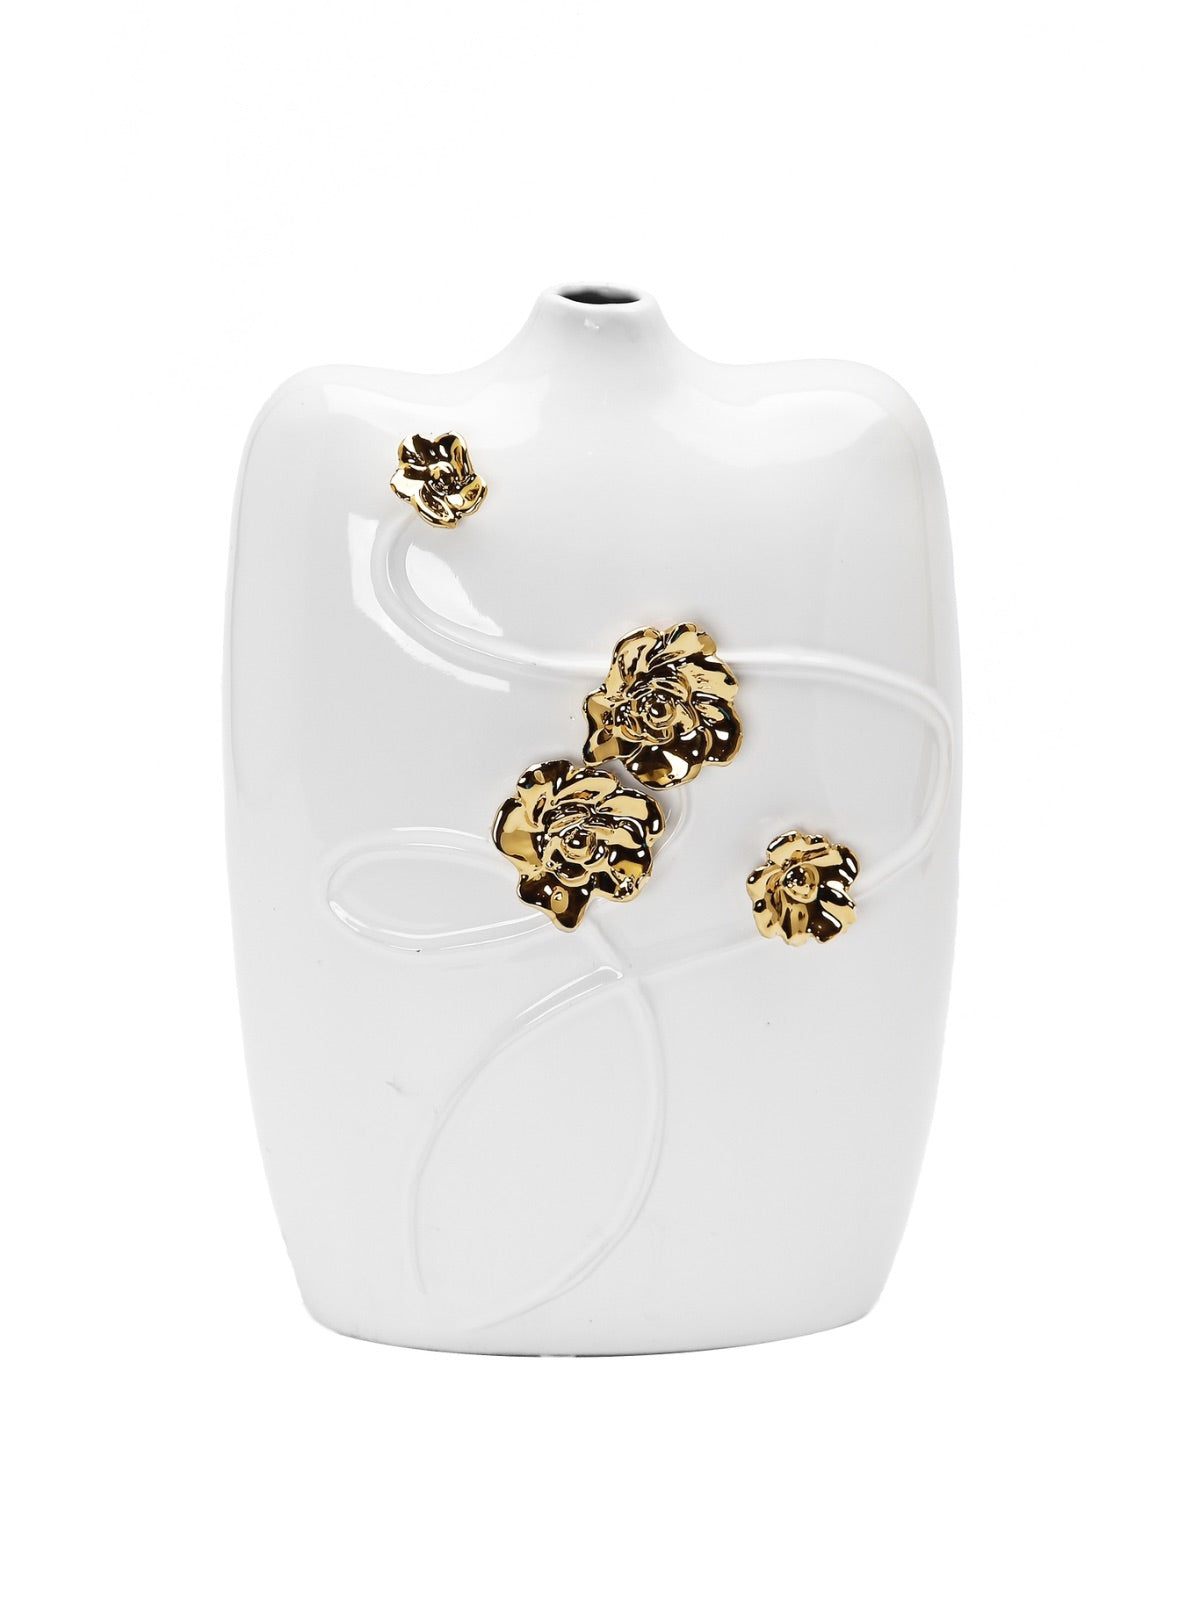 White Ceramic Vase with Gold Flower Petals sold by KYA Home Decor.